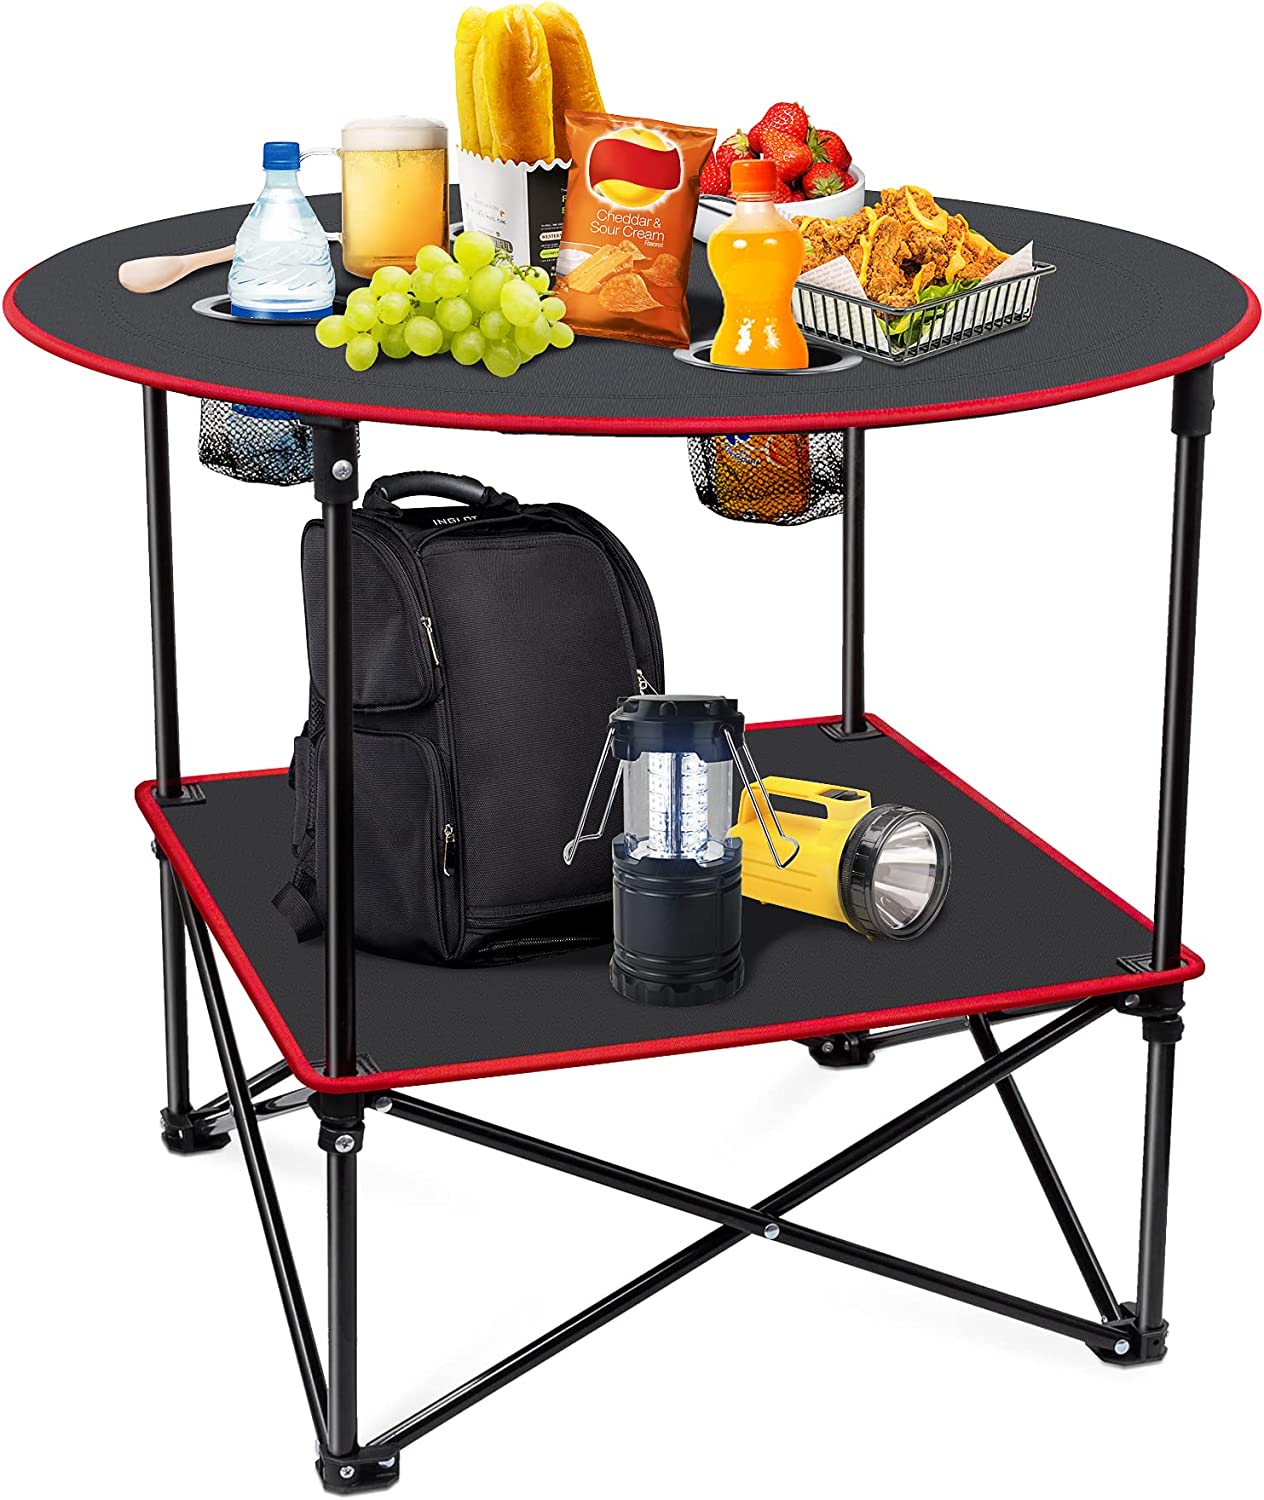 Portable Camping Folding Table 